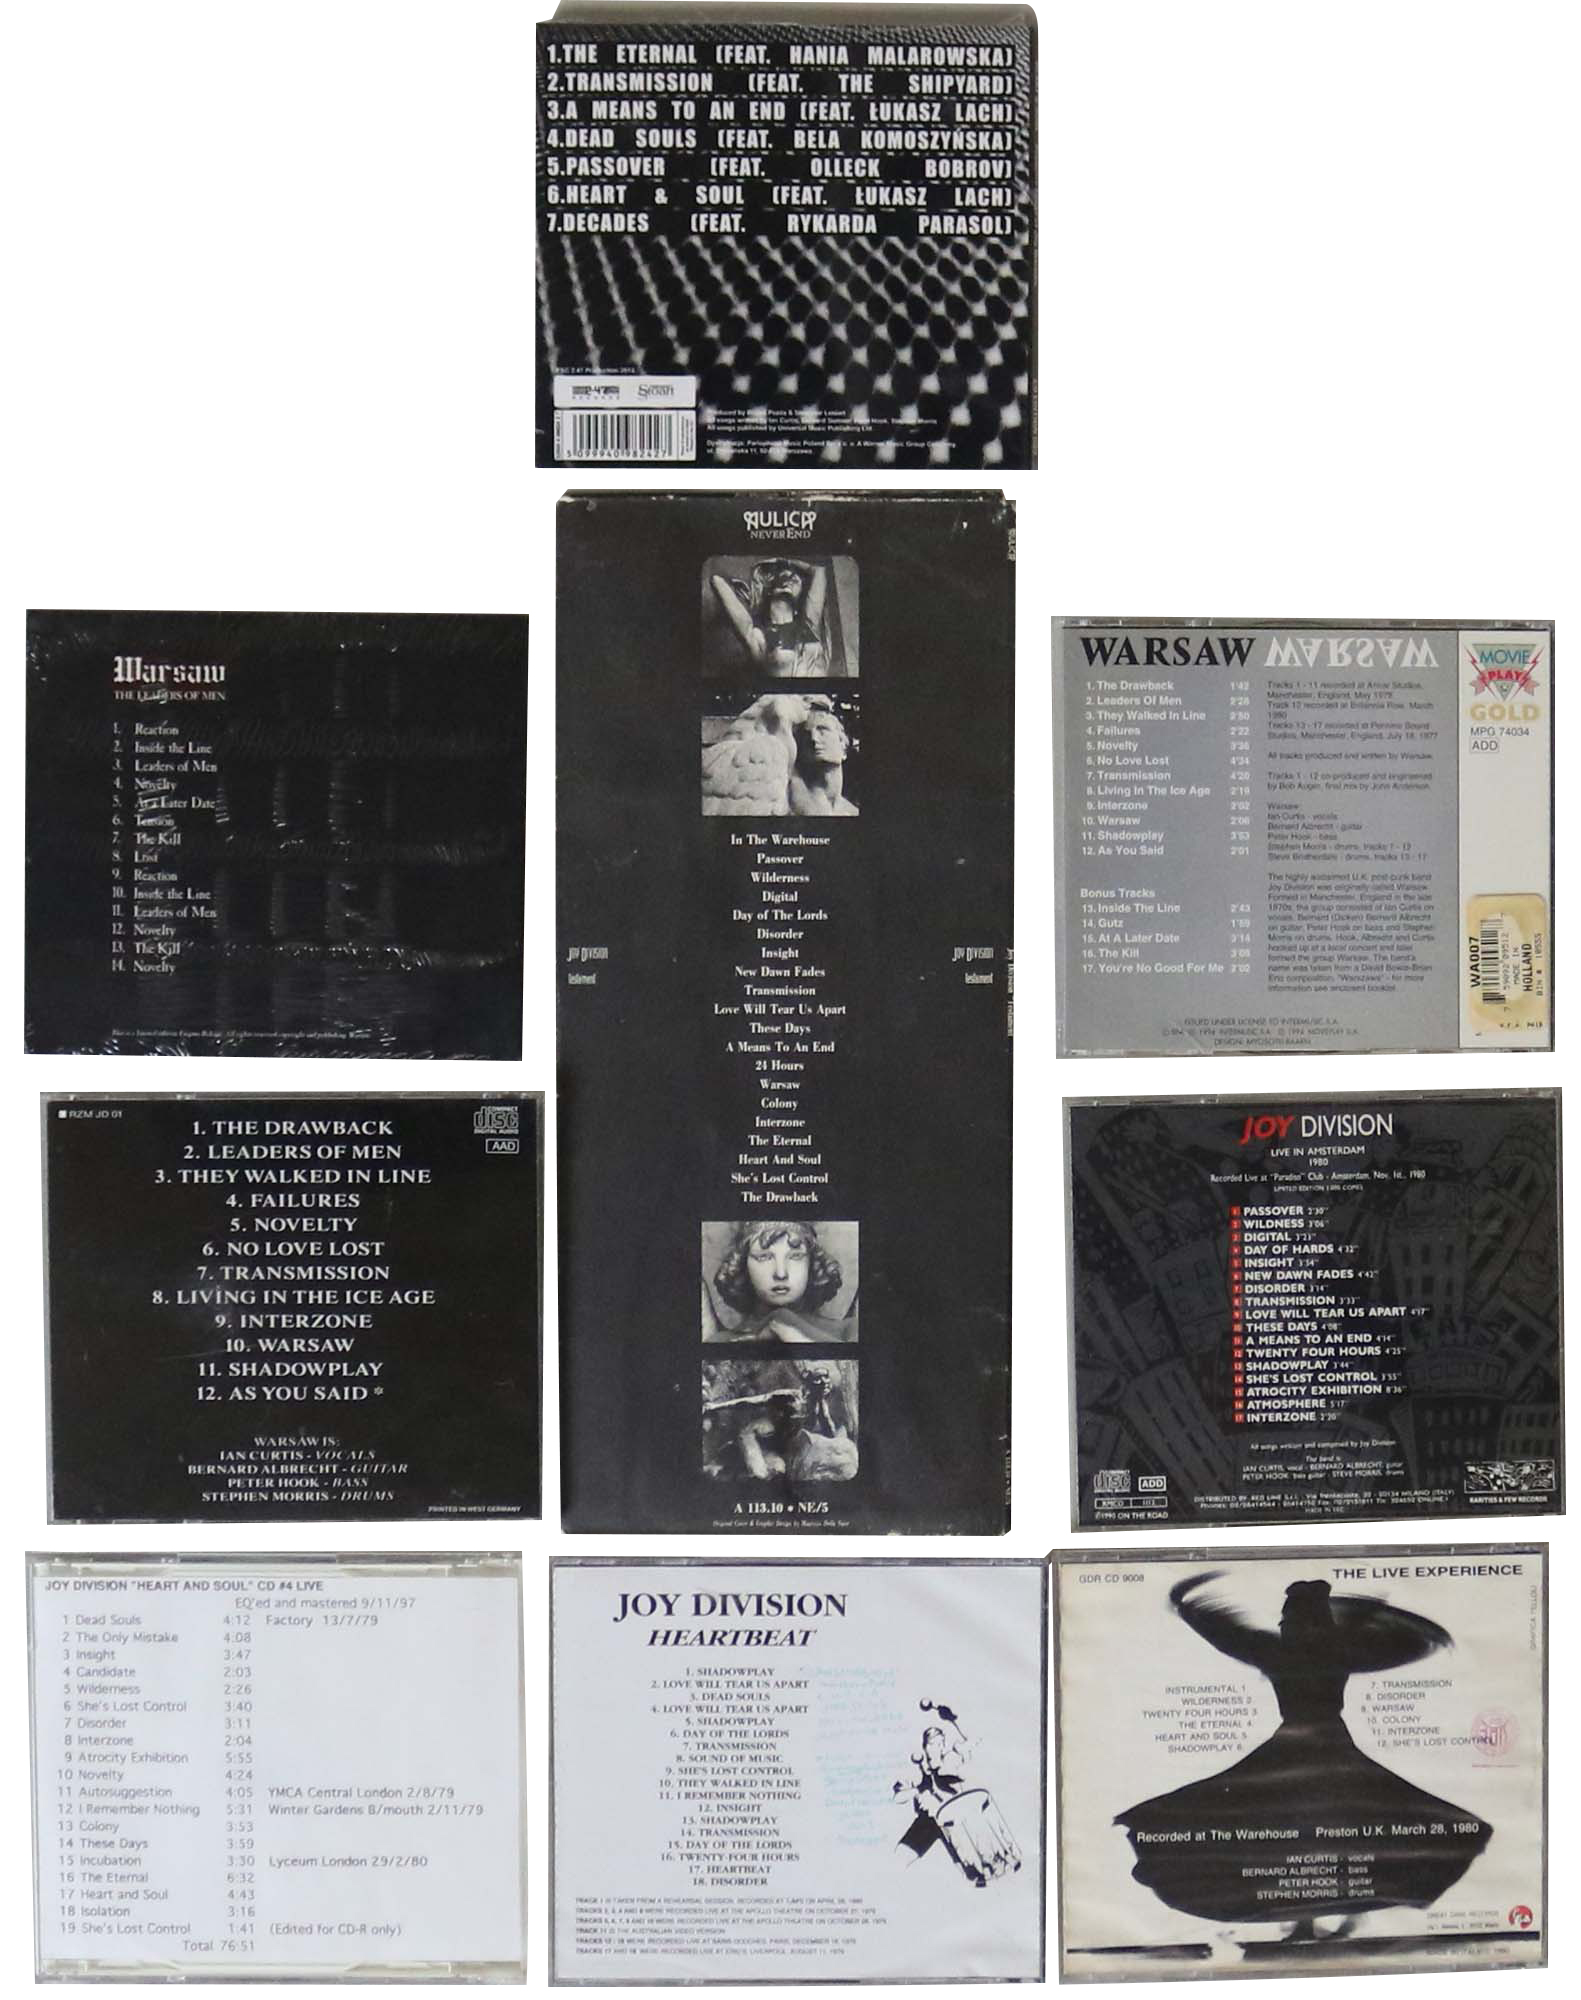 JOY DIVISION CD BOOTLEGS. Interesting selection of 9 bootleg CDs. - Image 2 of 2